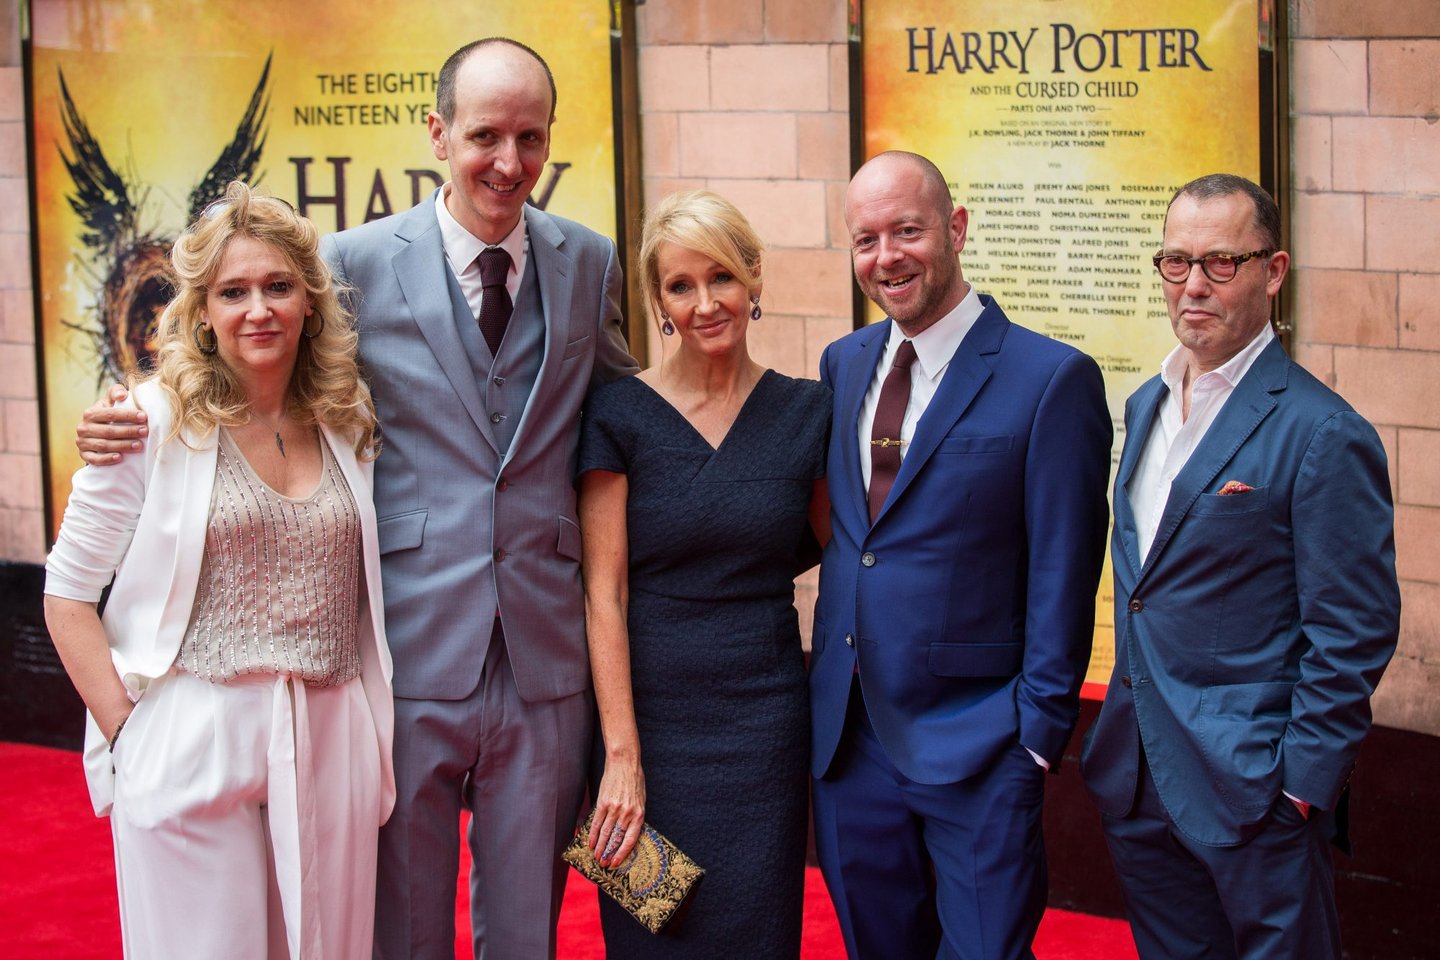 LONDON, ENGLAND - JULY 30: Sonia Friedman, Jack Thorne, J. K. Rowling, John Tiffany and Colin Callender attend the press preview of "Harry Potter & The Cursed Child" at Palace Theatre on July 30, 2016 in London, England. Harry Potter and the Cursed Child, a two-part West End stage play written by Jack Thorne based on an original new story by Thorne, J.K. Rowling and John Tiffany. (Photo by Rob Stothard/Getty Images)